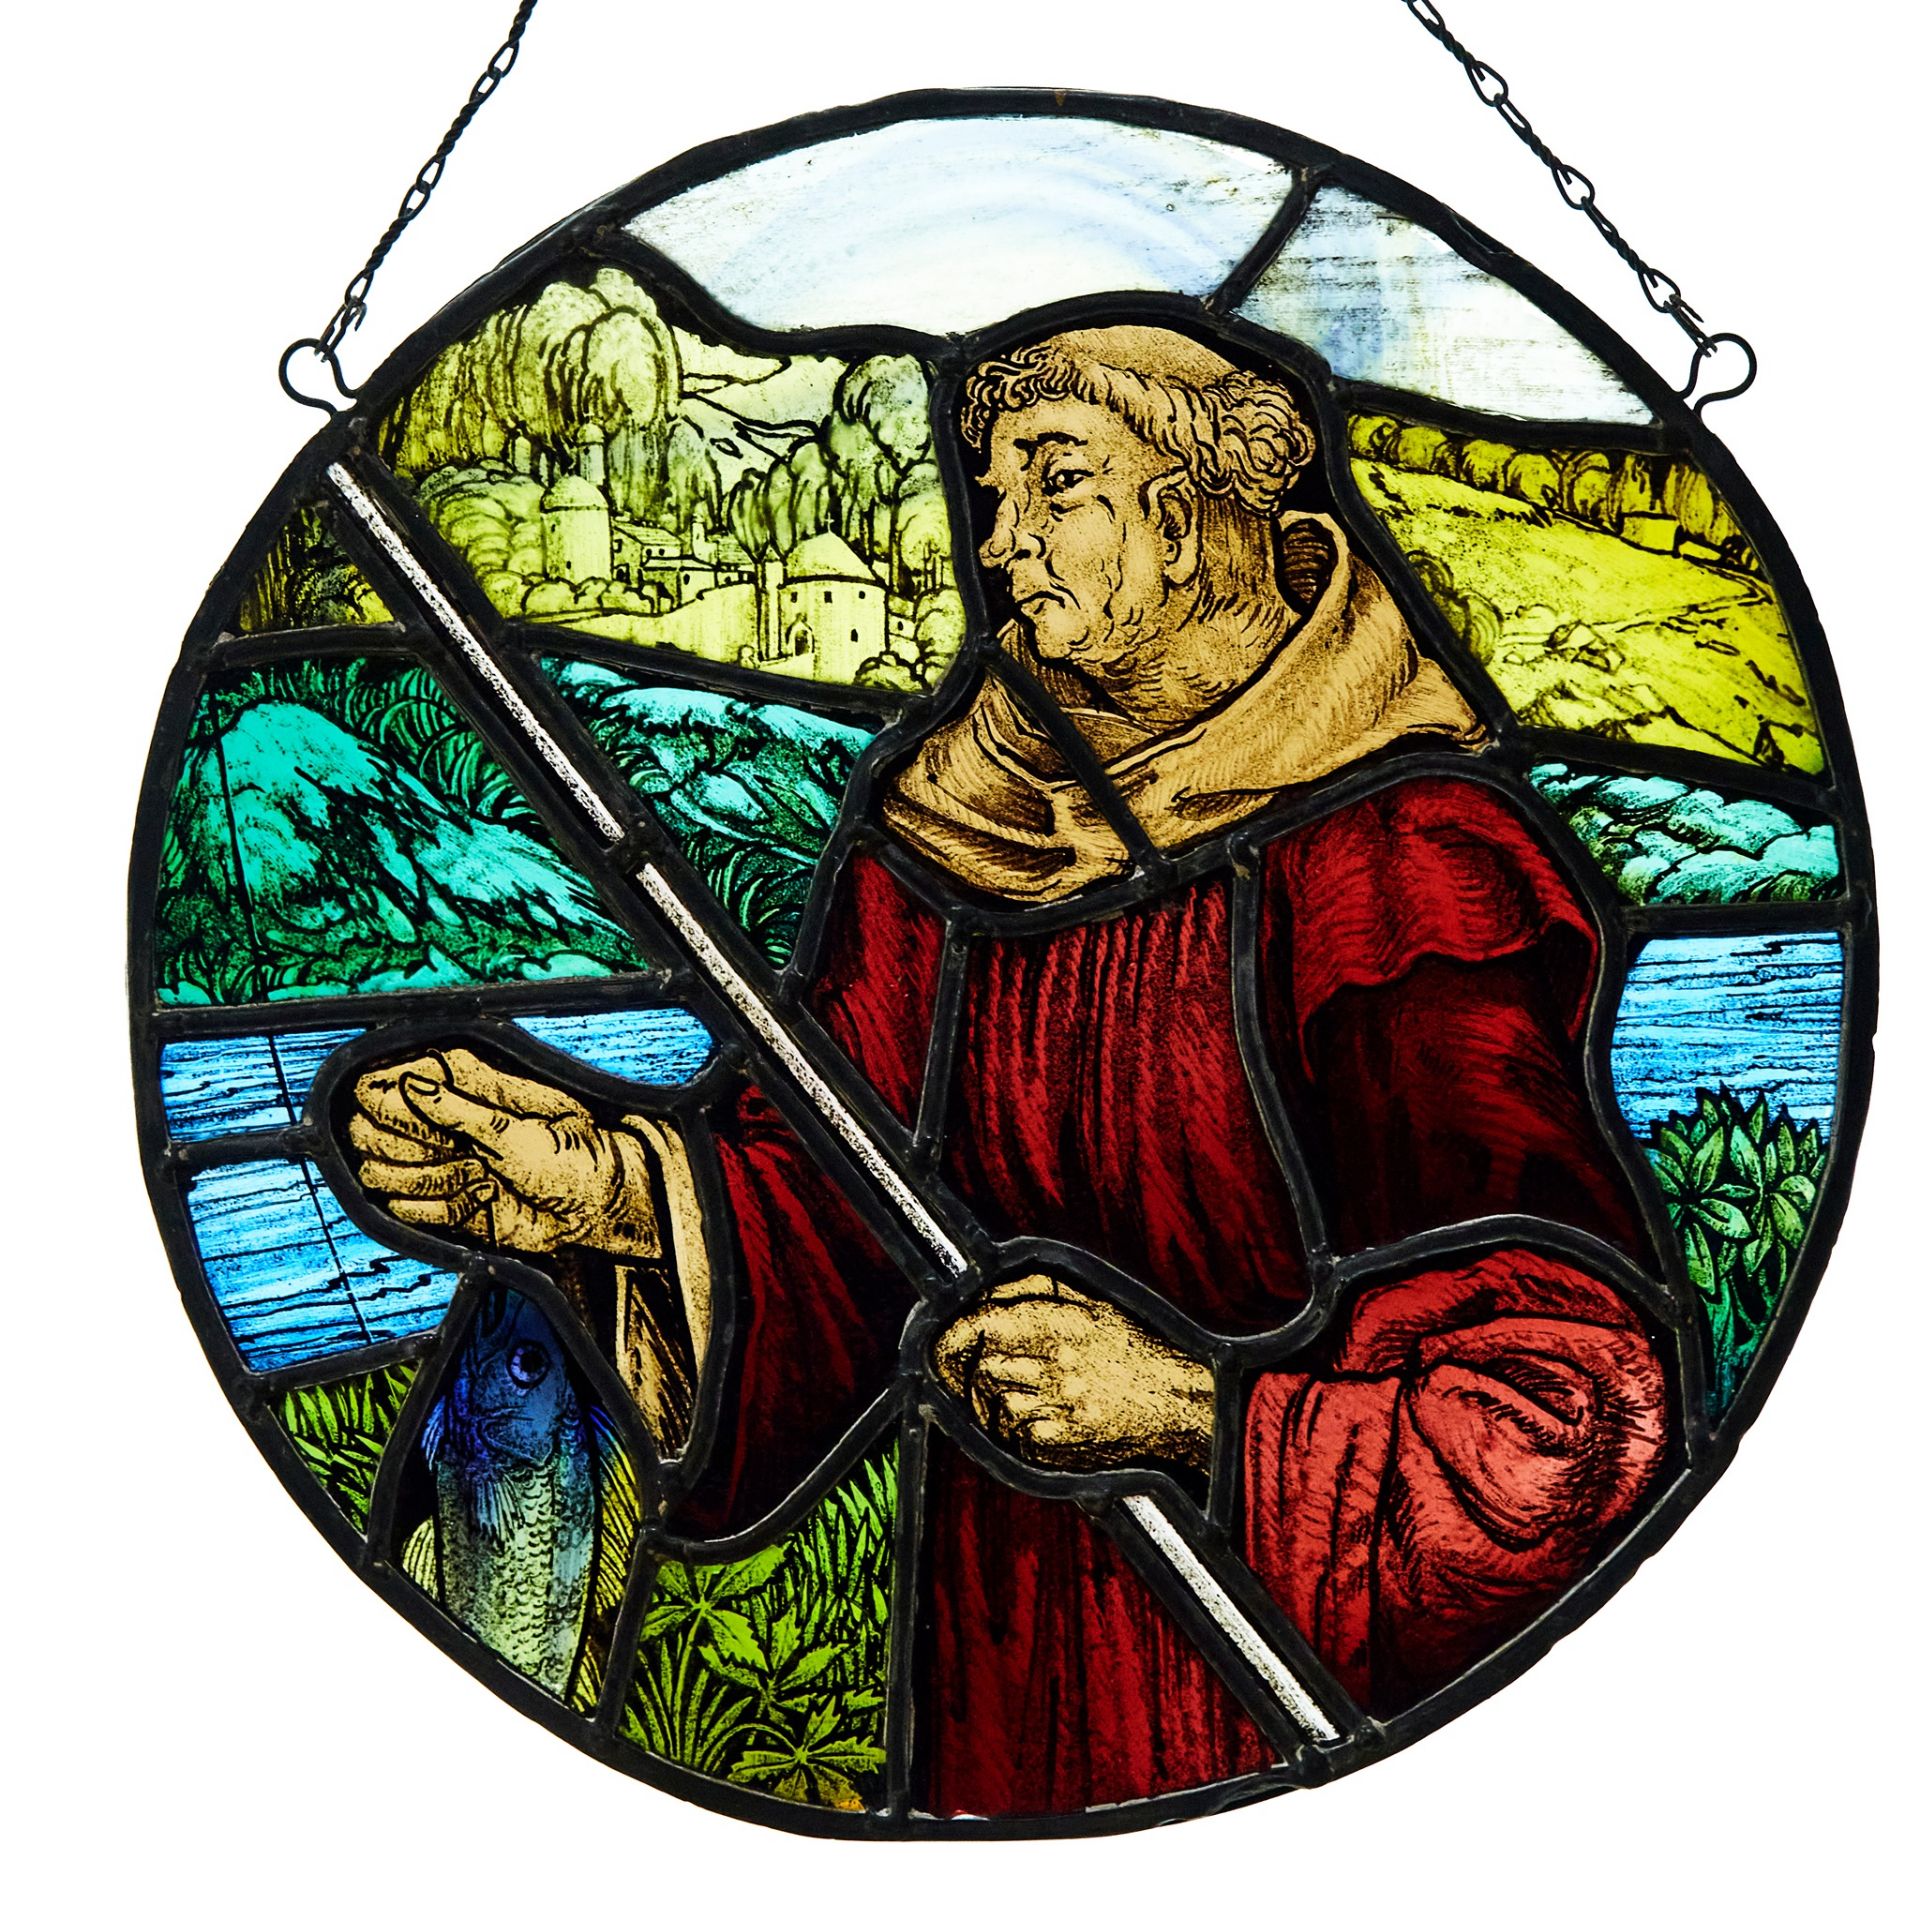 ENGLISH ARTS & CRAFTS STAINED GLASS PANEL, CIRCA 1920 - Image 2 of 2